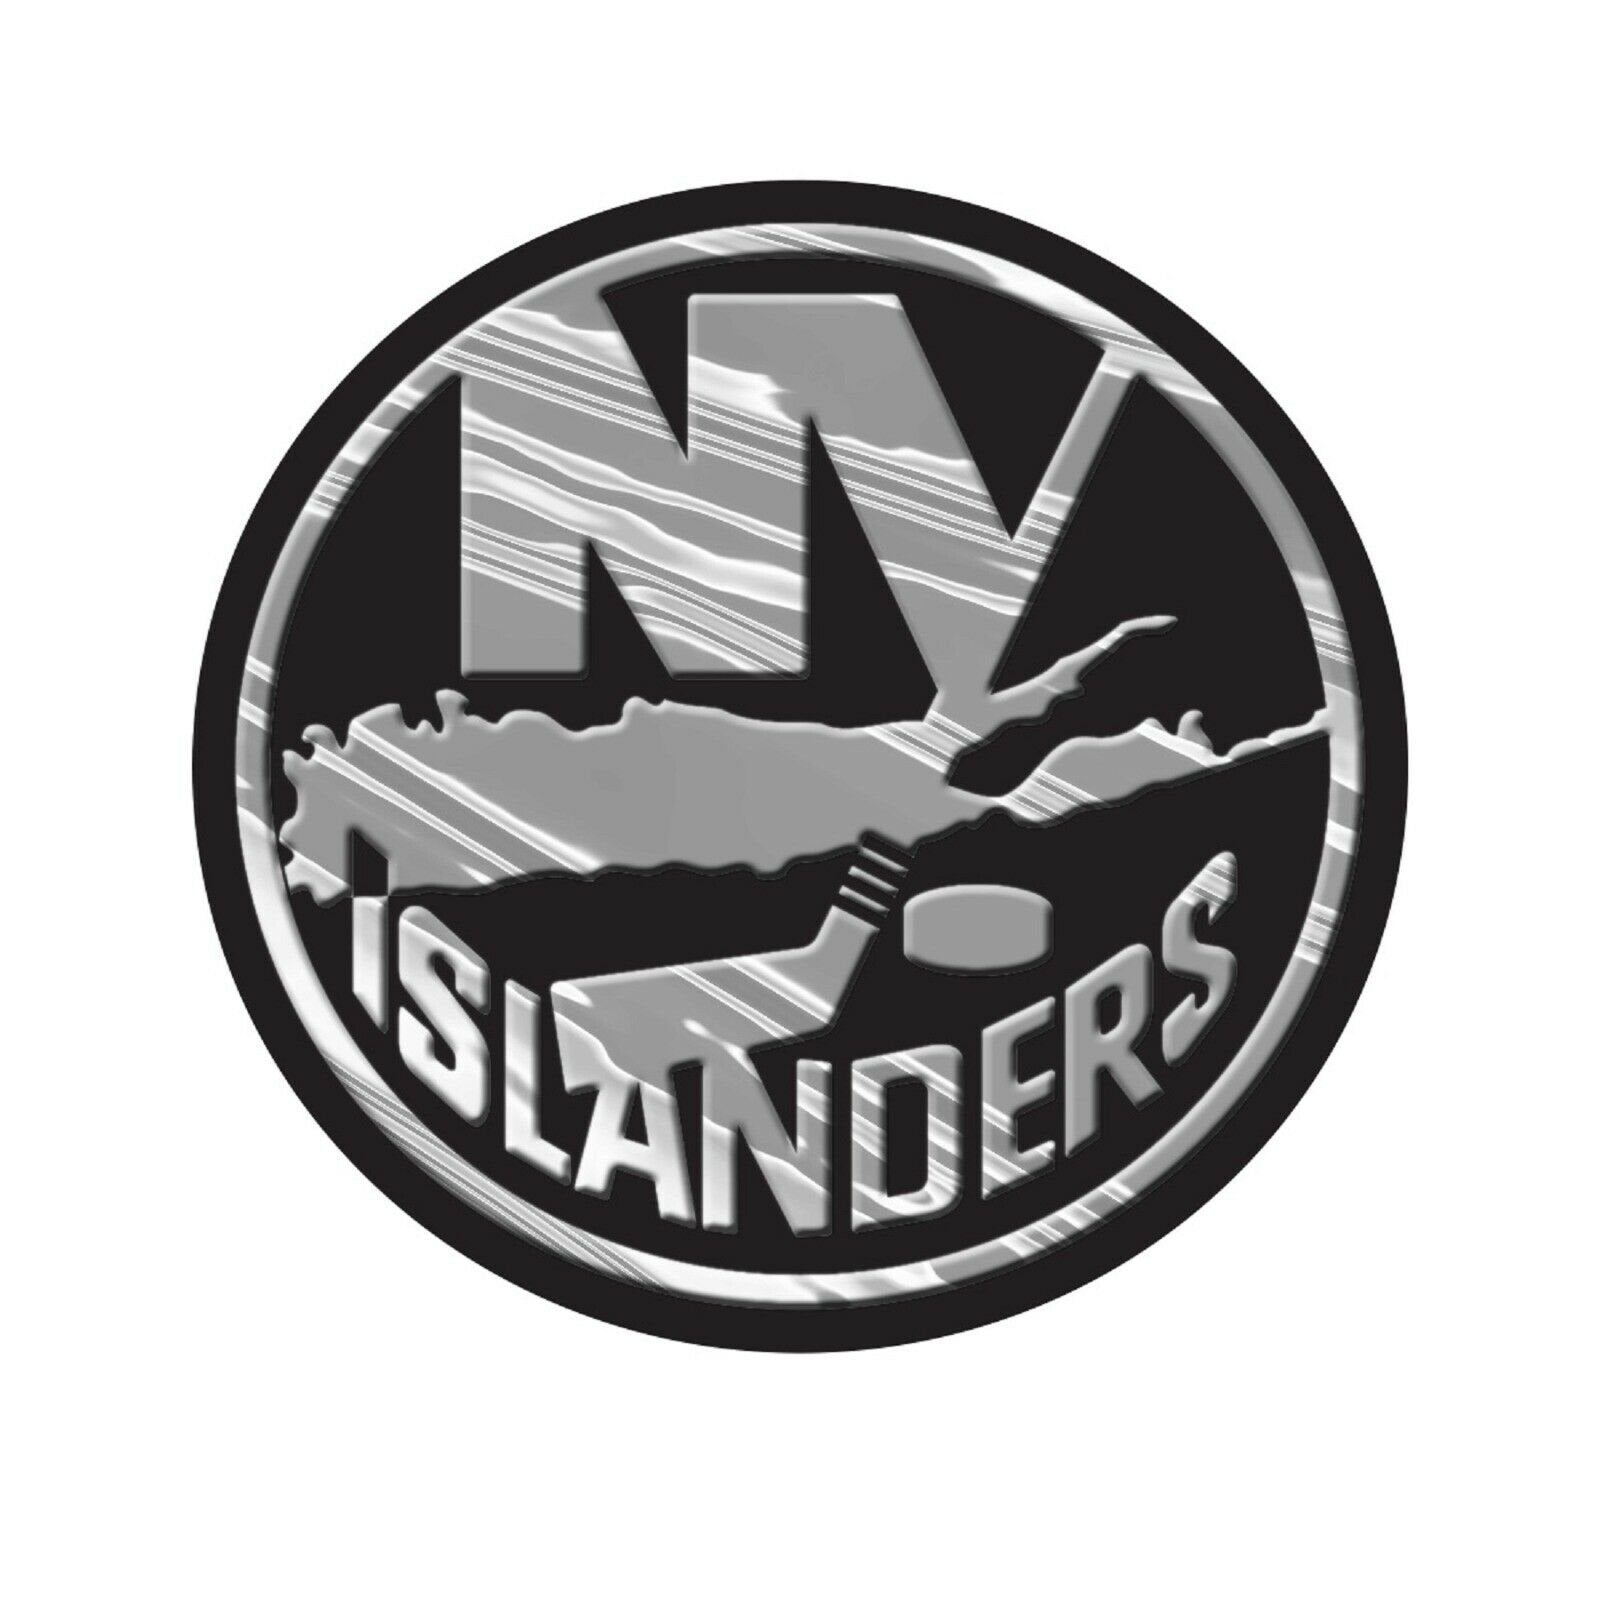 New York Islanders Auto Emblem, Plastic Molded, Silver Chrome Color, Raised 3D Effect, Adhesive Backing